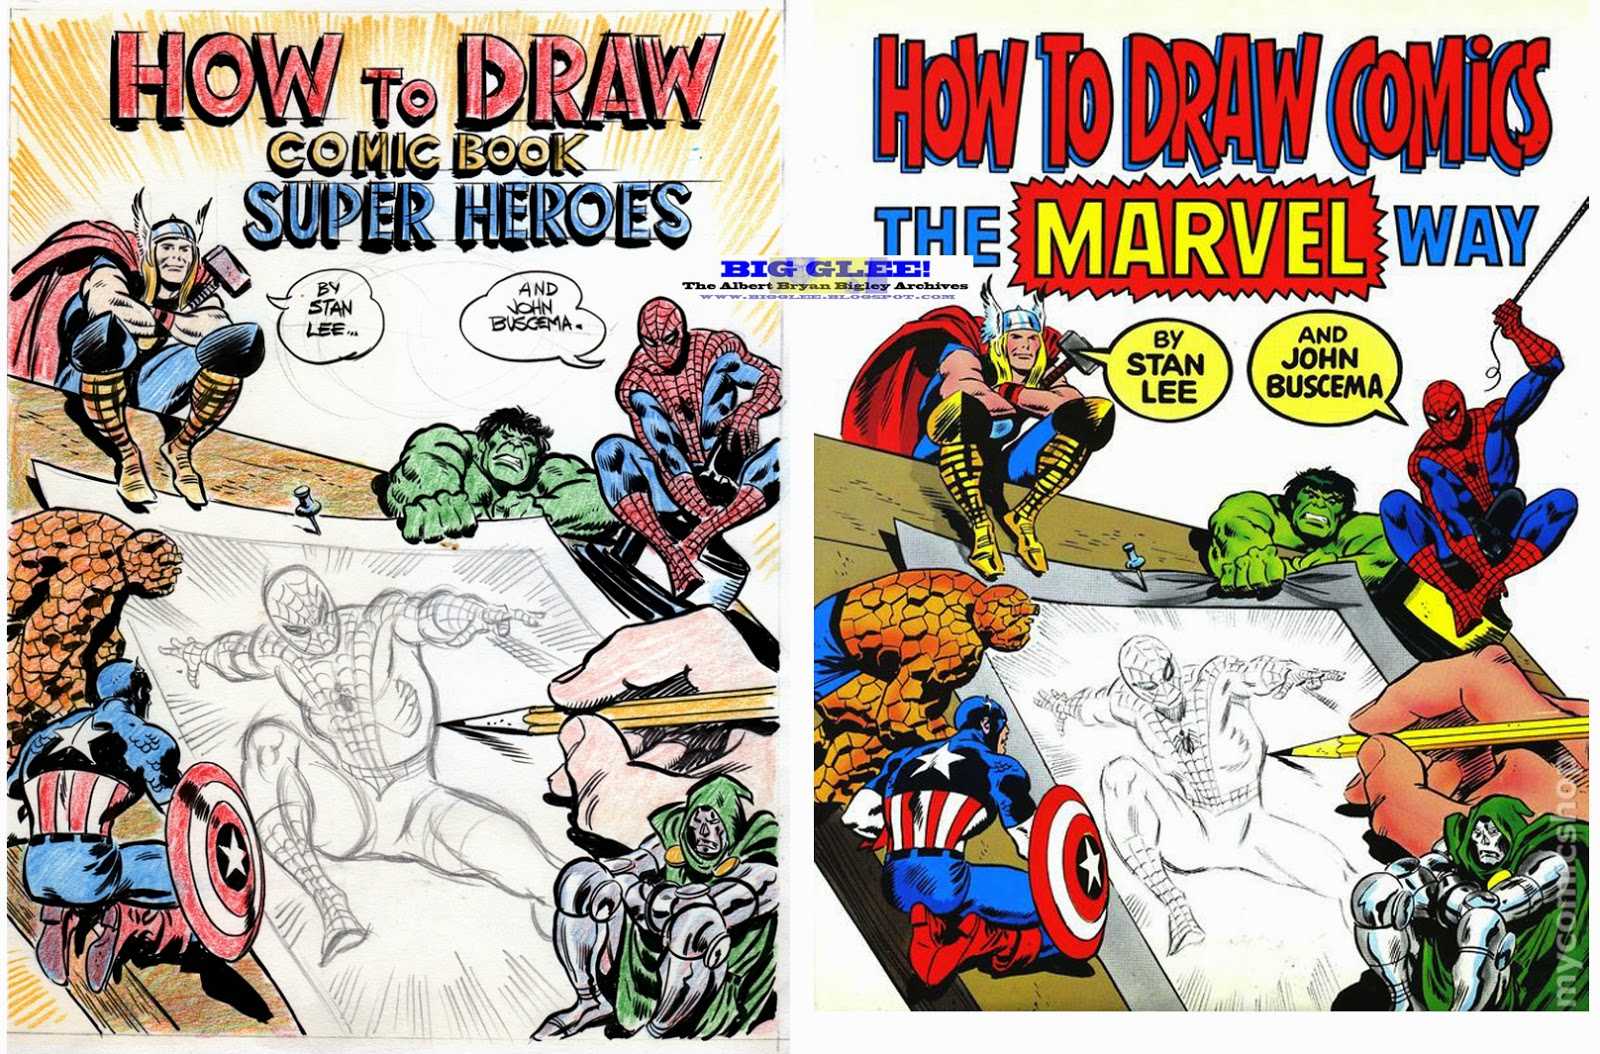  How to draw comics the marvel way pdf free download 